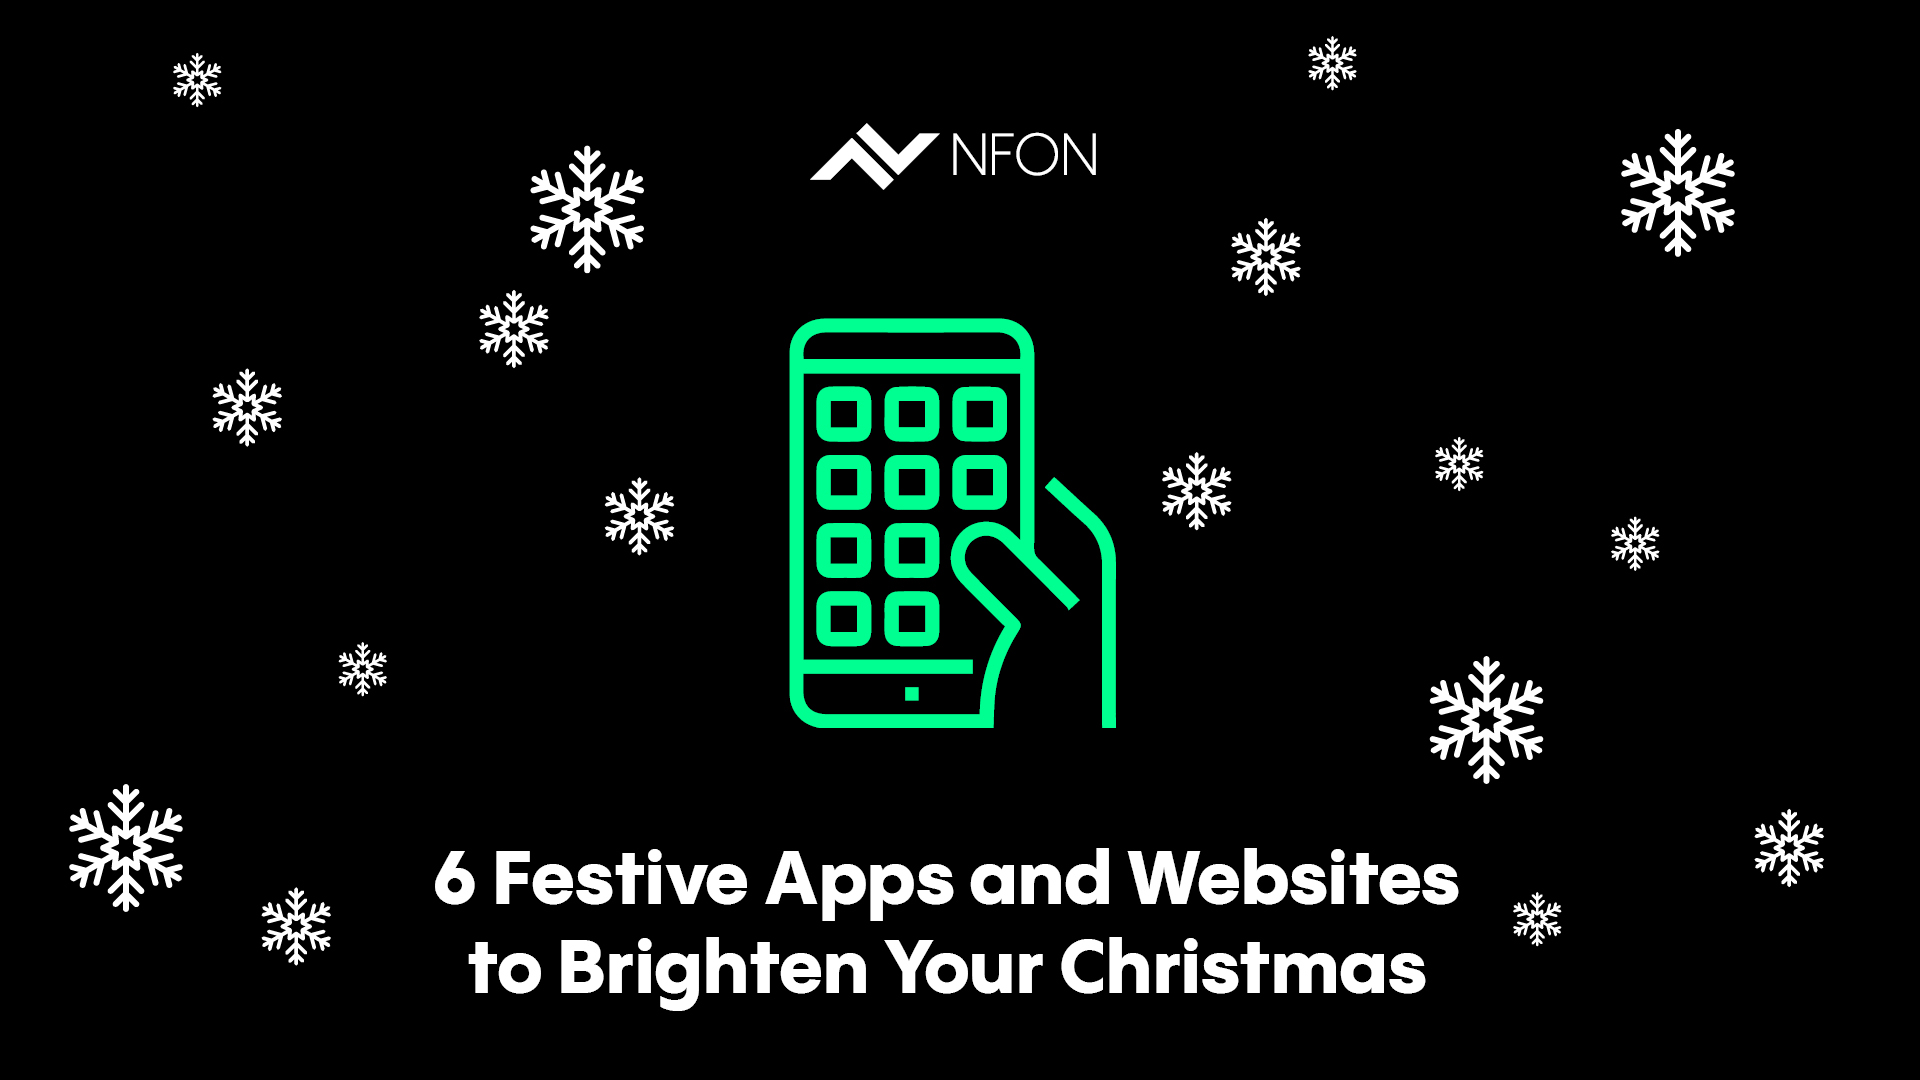 6 Festive Apps and Websites to Brighten Your Christmas